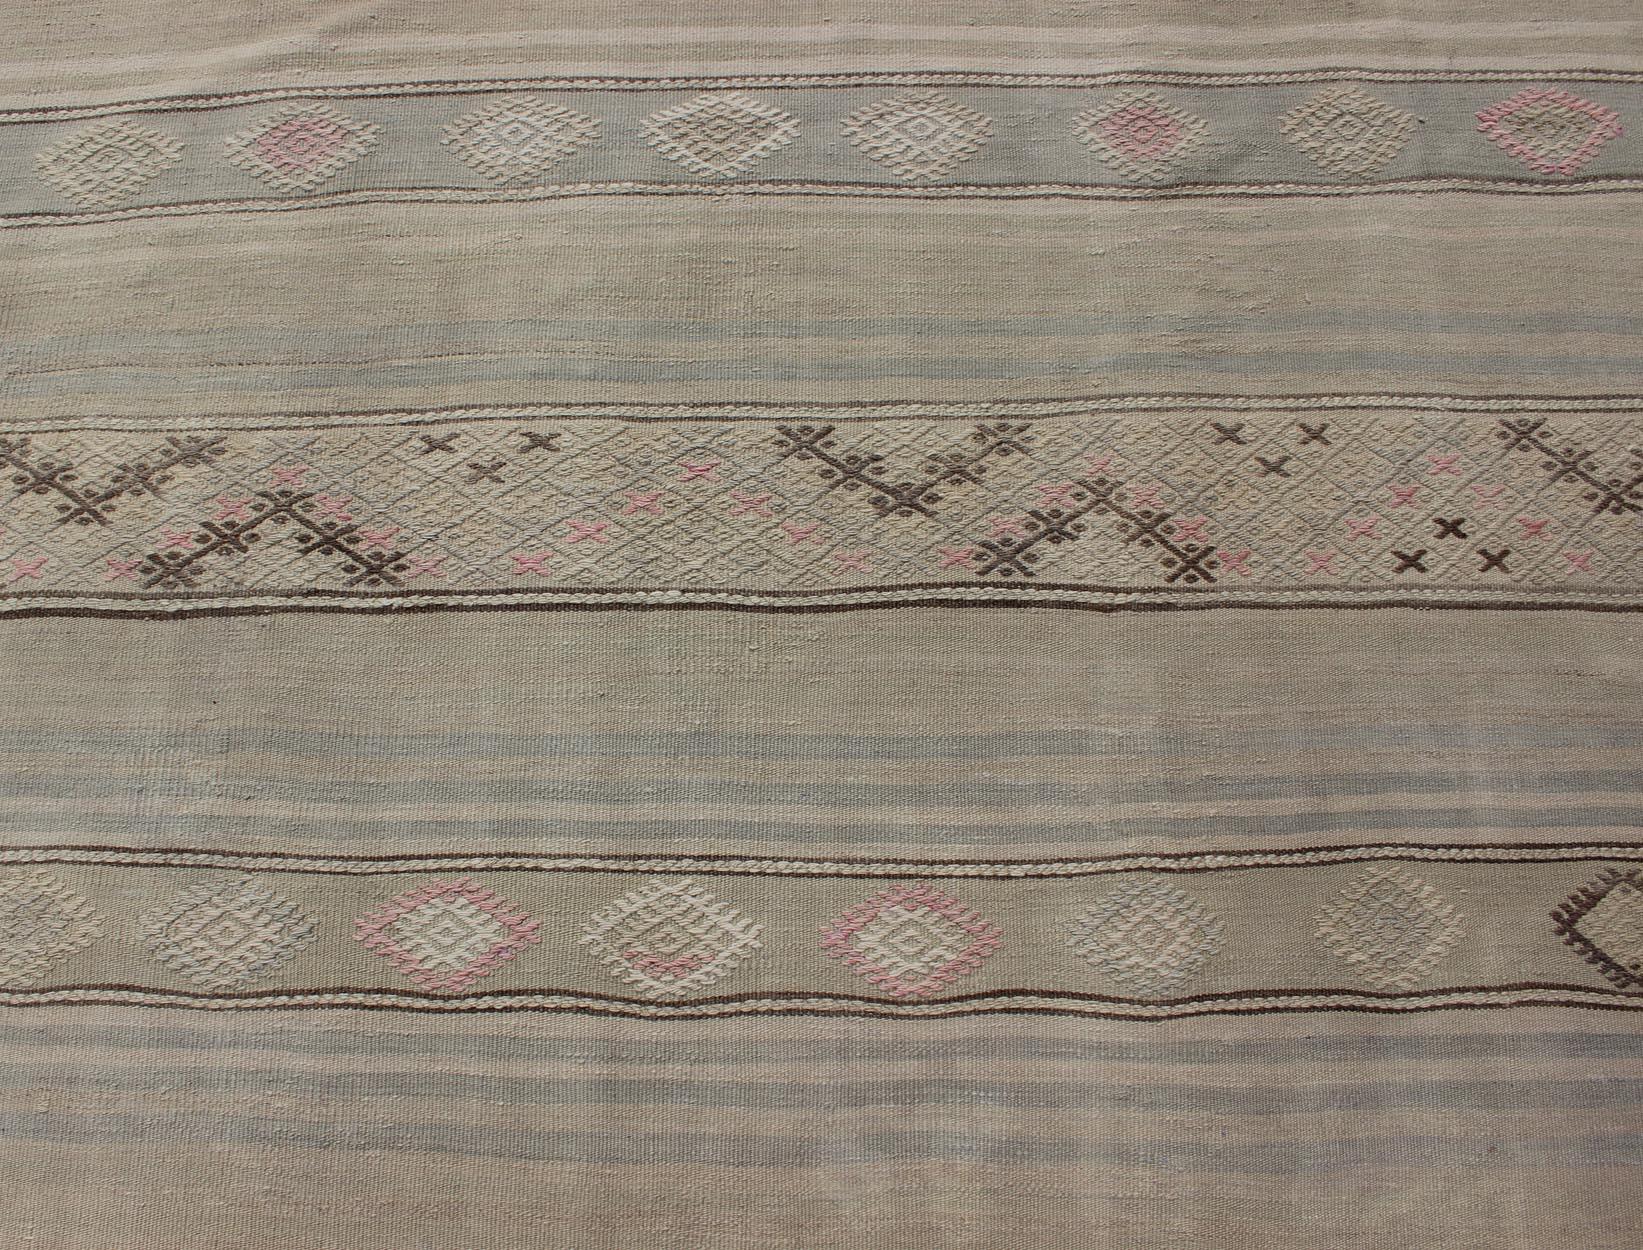 Vintage Turkish Flat-Weave Striped Kilim in Taupe, Pink, and Light Brown For Sale 4